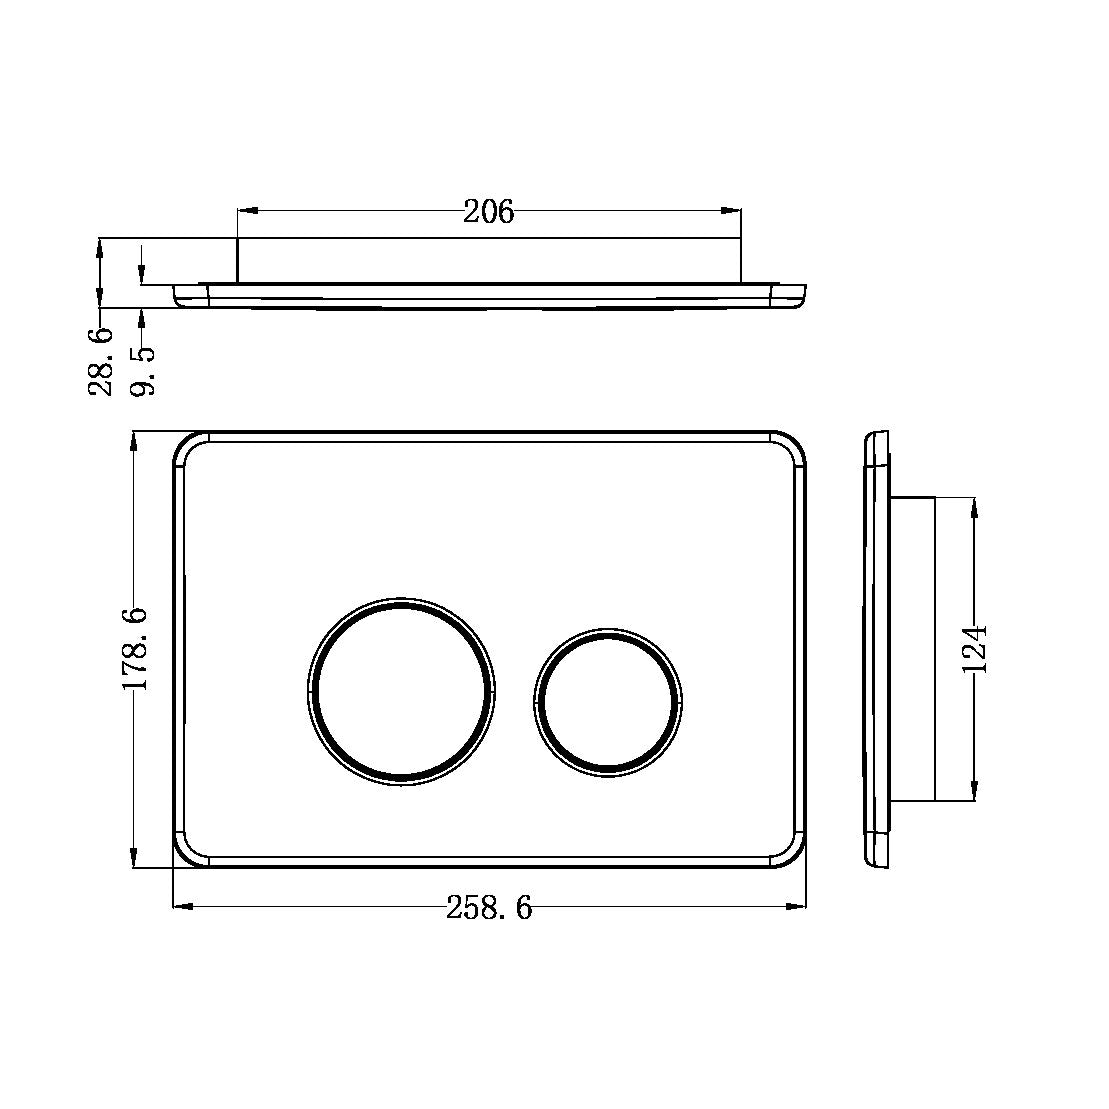 In Wall Toilet Push Plate Graphite - NRPL001GR